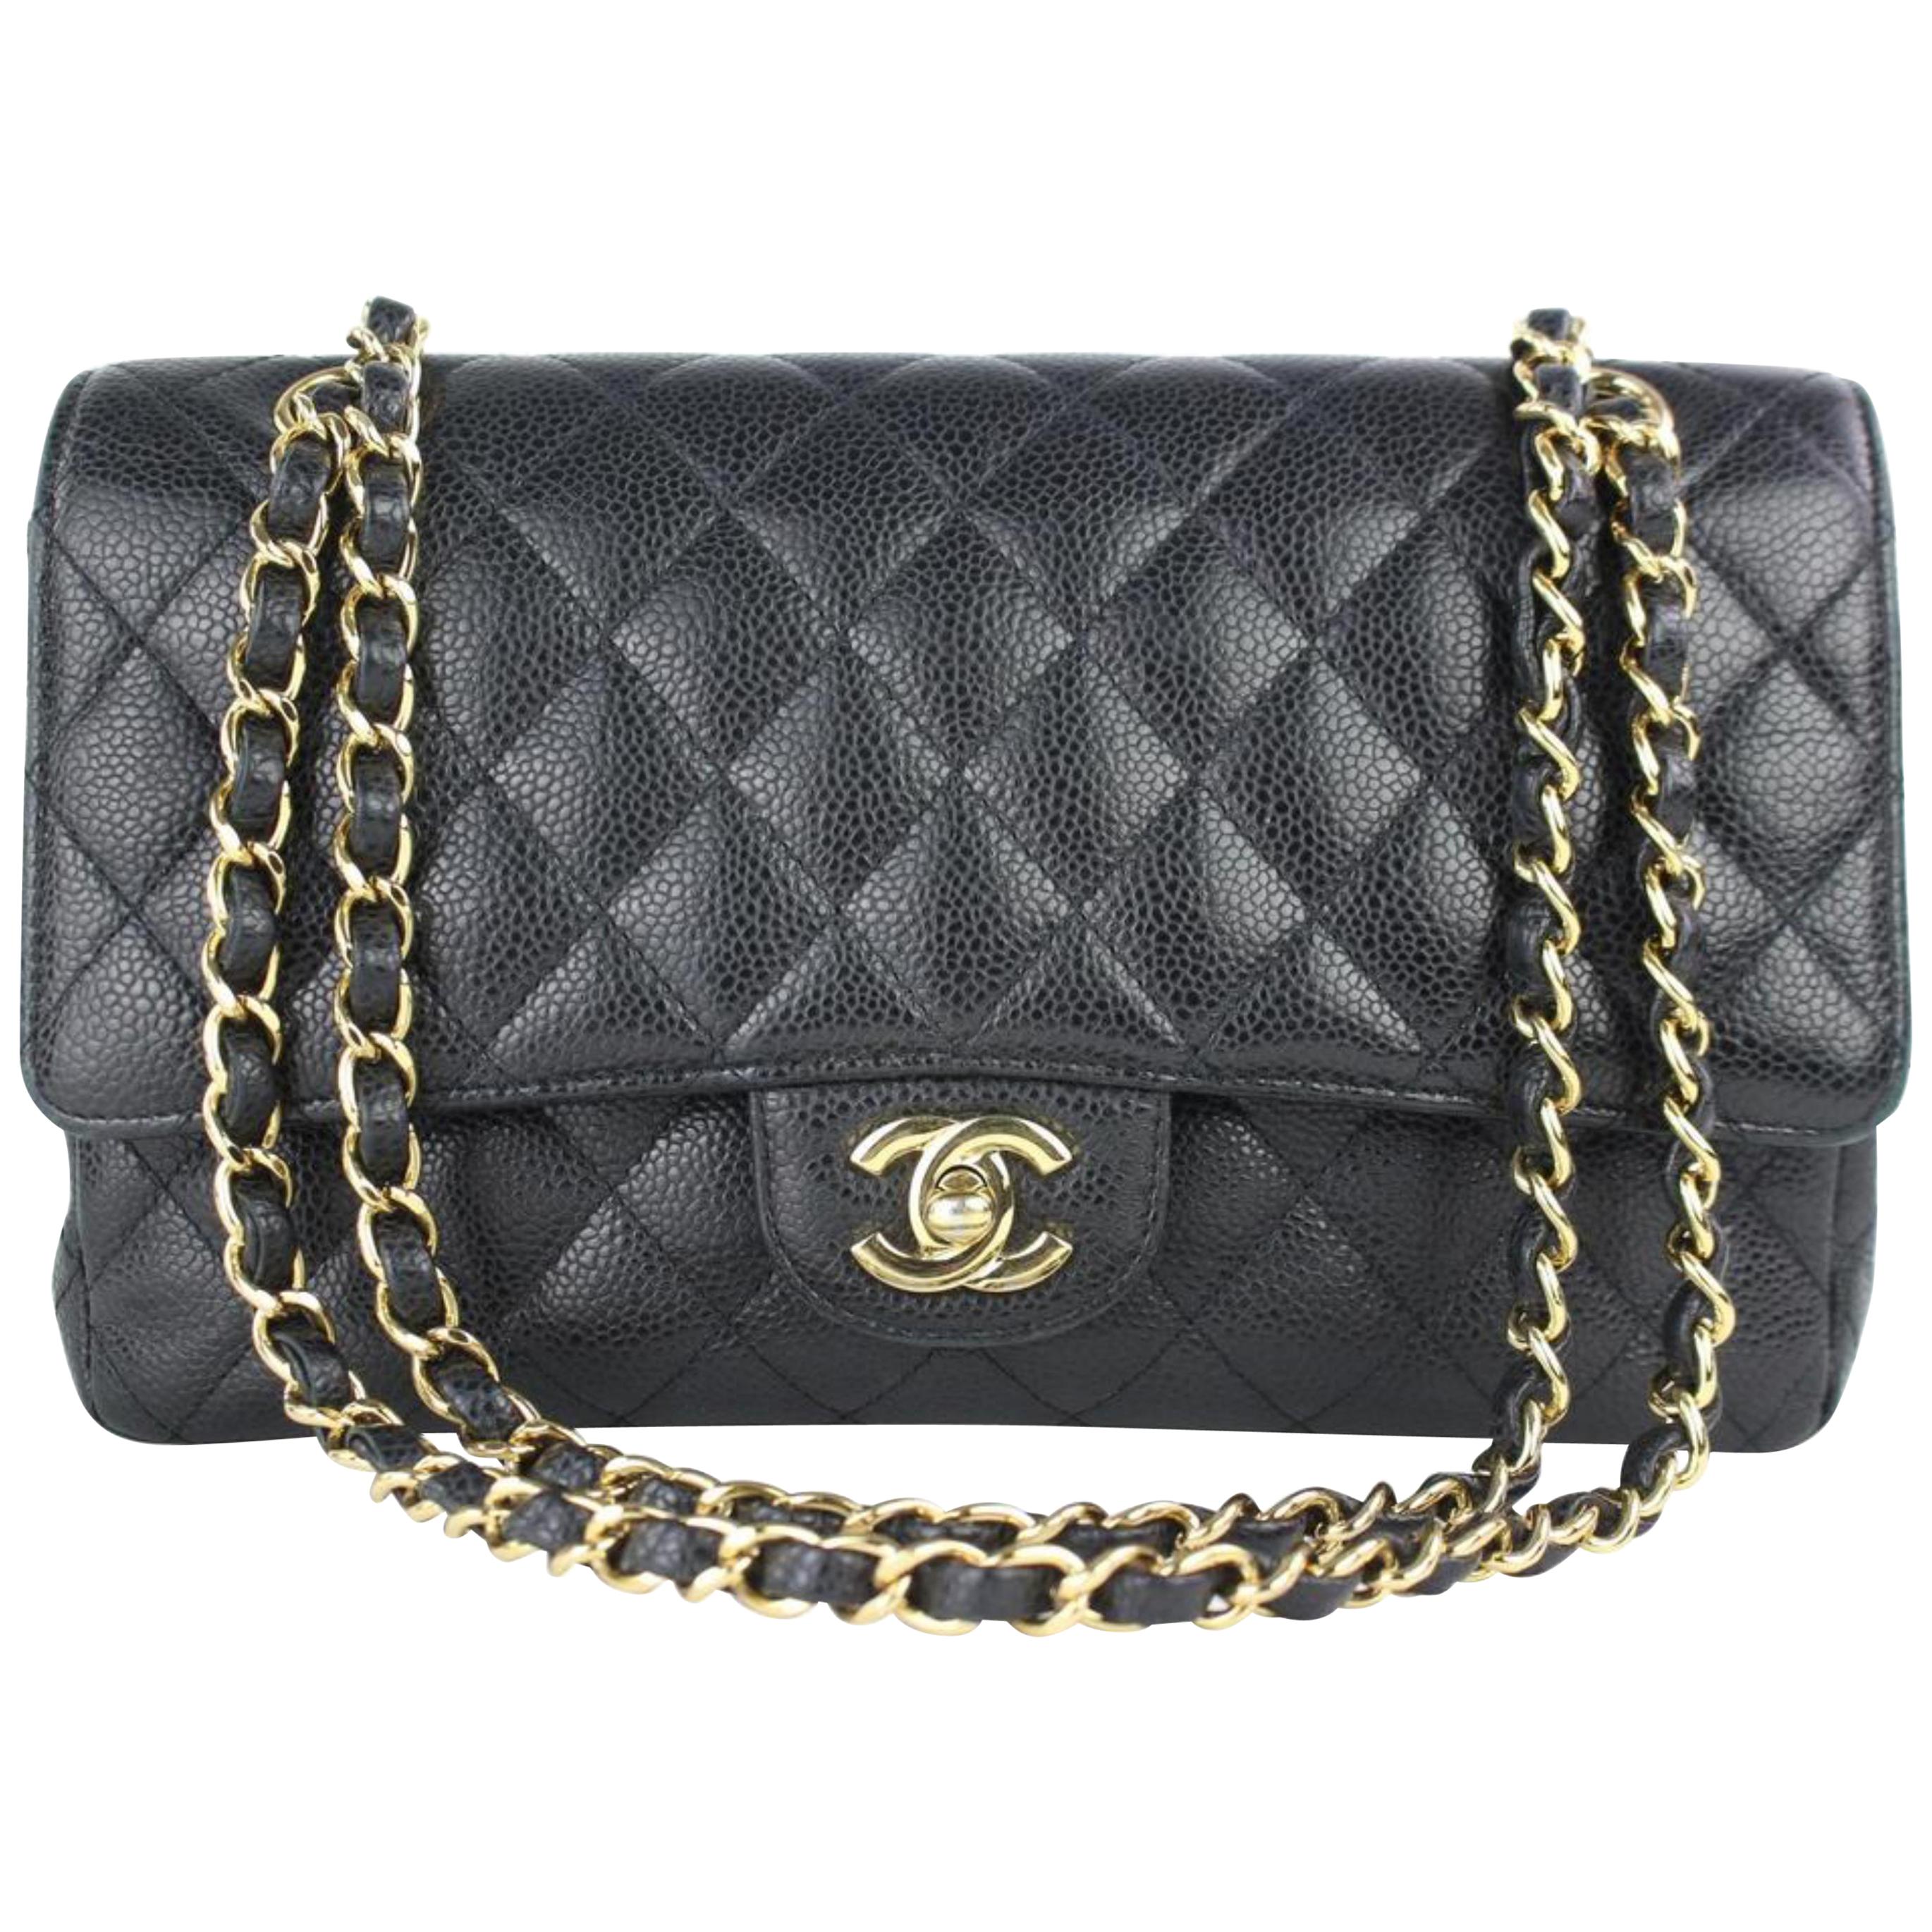 Chanel Quilted Medium Classic Double Flap 6cj0115 Black Leather Shoulder Bag For Sale